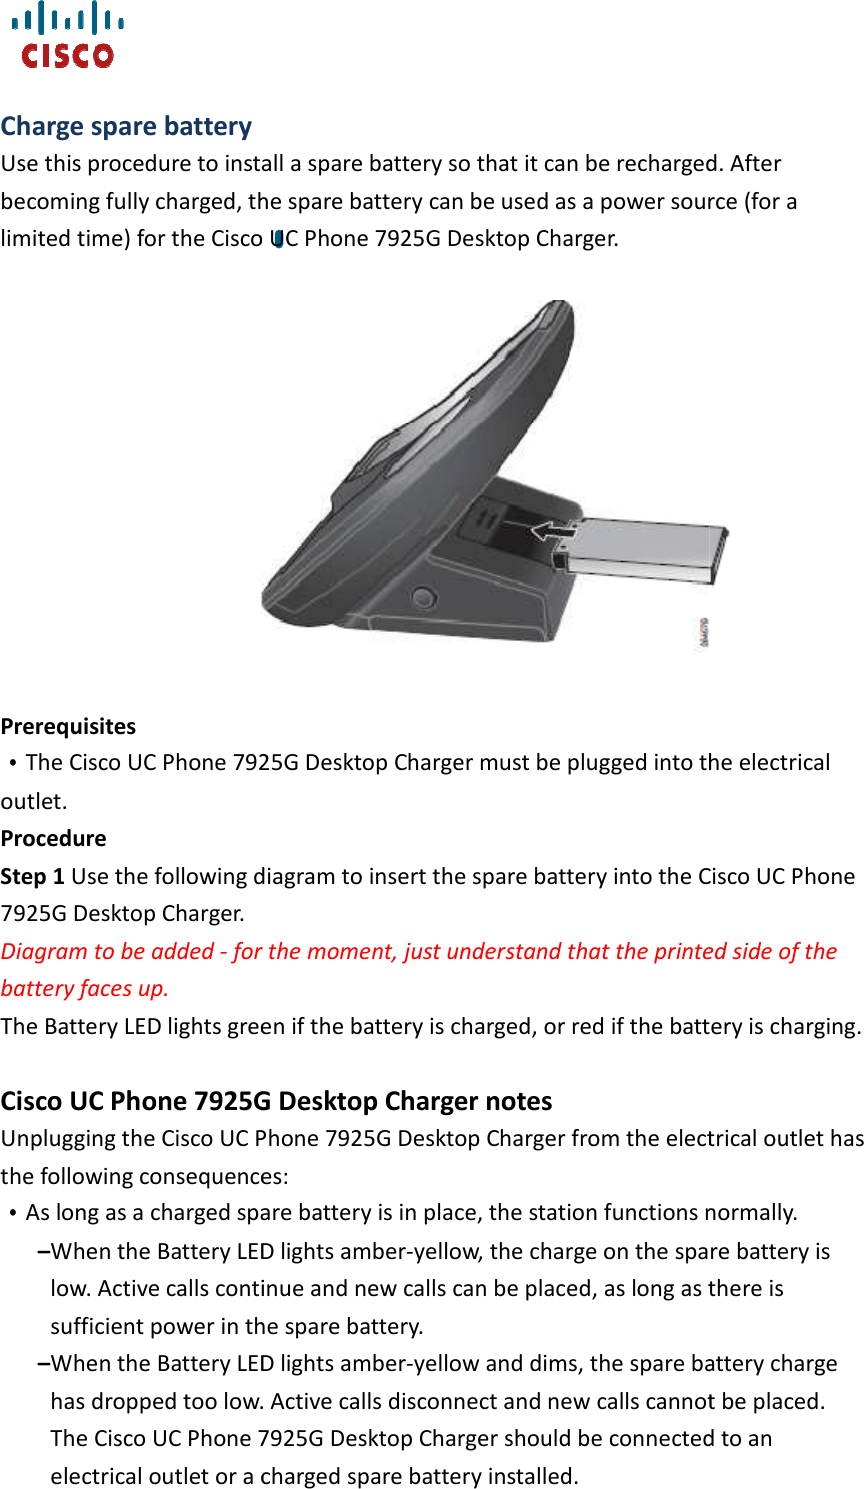     Charge spare battery Use this procedure to install a spare battery so that it can be recharged. After becoming fully charged, the spare battery can be used as a power source (for a limited time) for the Cisco U                    Prerequisites   ••••The Cisco UC Phone 7925G Desktop Charger must be plugged into the electrical outlet. Procedure Step 1 Use the following diagram to insert the spare battery into the Cisco U7925G Desktop Charger. Diagram to be added - for the moment, just understand that the battery faces up. The Battery LED lights green if the battery is charged, or red if the battery is charging. Cisco UC Phone 7925G Desktop Charger notesUnplugging the Cisco UC Phone 7925G Desktop Charger from the electrical outlet has the following consequences: ••••As long as a charged spare battery is in place, the station functions normally.–When the Battery LED lights amberlow. Active calls continue and new calls can be placed, as long as tsufficient power in the spare battery. –When the Battery LED lights amberhas dropped too low. Active calls disconnect and new calls cannot be placed. The Cisco UC Phone 7925G Desktop Charger should be conelectrical outlet or a charged spare battery installed.  install a spare battery so that it can be recharged. After becoming fully charged, the spare battery can be used as a power source (for a limited time) for the Cisco UC Phone 7925G Desktop Charger. Phone 7925G Desktop Charger must be plugged into the electrical Use the following diagram to insert the spare battery into the Cisco U for the moment, just understand that the printed side of the The Battery LED lights green if the battery is charged, or red if the battery is charging.Phone 7925G Desktop Charger notes Phone 7925G Desktop Charger from the electrical outlet has the following consequences:  As long as a charged spare battery is in place, the station functions normally.When the Battery LED lights amber-yellow, the charge on the spare battery is low. Active calls continue and new calls can be placed, as long as tsufficient power in the spare battery.  When the Battery LED lights amber-yellow and dims, the spare battery charge has dropped too low. Active calls disconnect and new calls cannot be placed. Phone 7925G Desktop Charger should be connected to an electrical outlet or a charged spare battery installed.  install a spare battery so that it can be recharged. After becoming fully charged, the spare battery can be used as a power source (for a  Phone 7925G Desktop Charger must be plugged into the electrical Use the following diagram to insert the spare battery into the Cisco UC Phone printed side of the The Battery LED lights green if the battery is charged, or red if the battery is charging. Phone 7925G Desktop Charger from the electrical outlet has As long as a charged spare battery is in place, the station functions normally. yellow, the charge on the spare battery is low. Active calls continue and new calls can be placed, as long as there is yellow and dims, the spare battery charge has dropped too low. Active calls disconnect and new calls cannot be placed. nected to an 